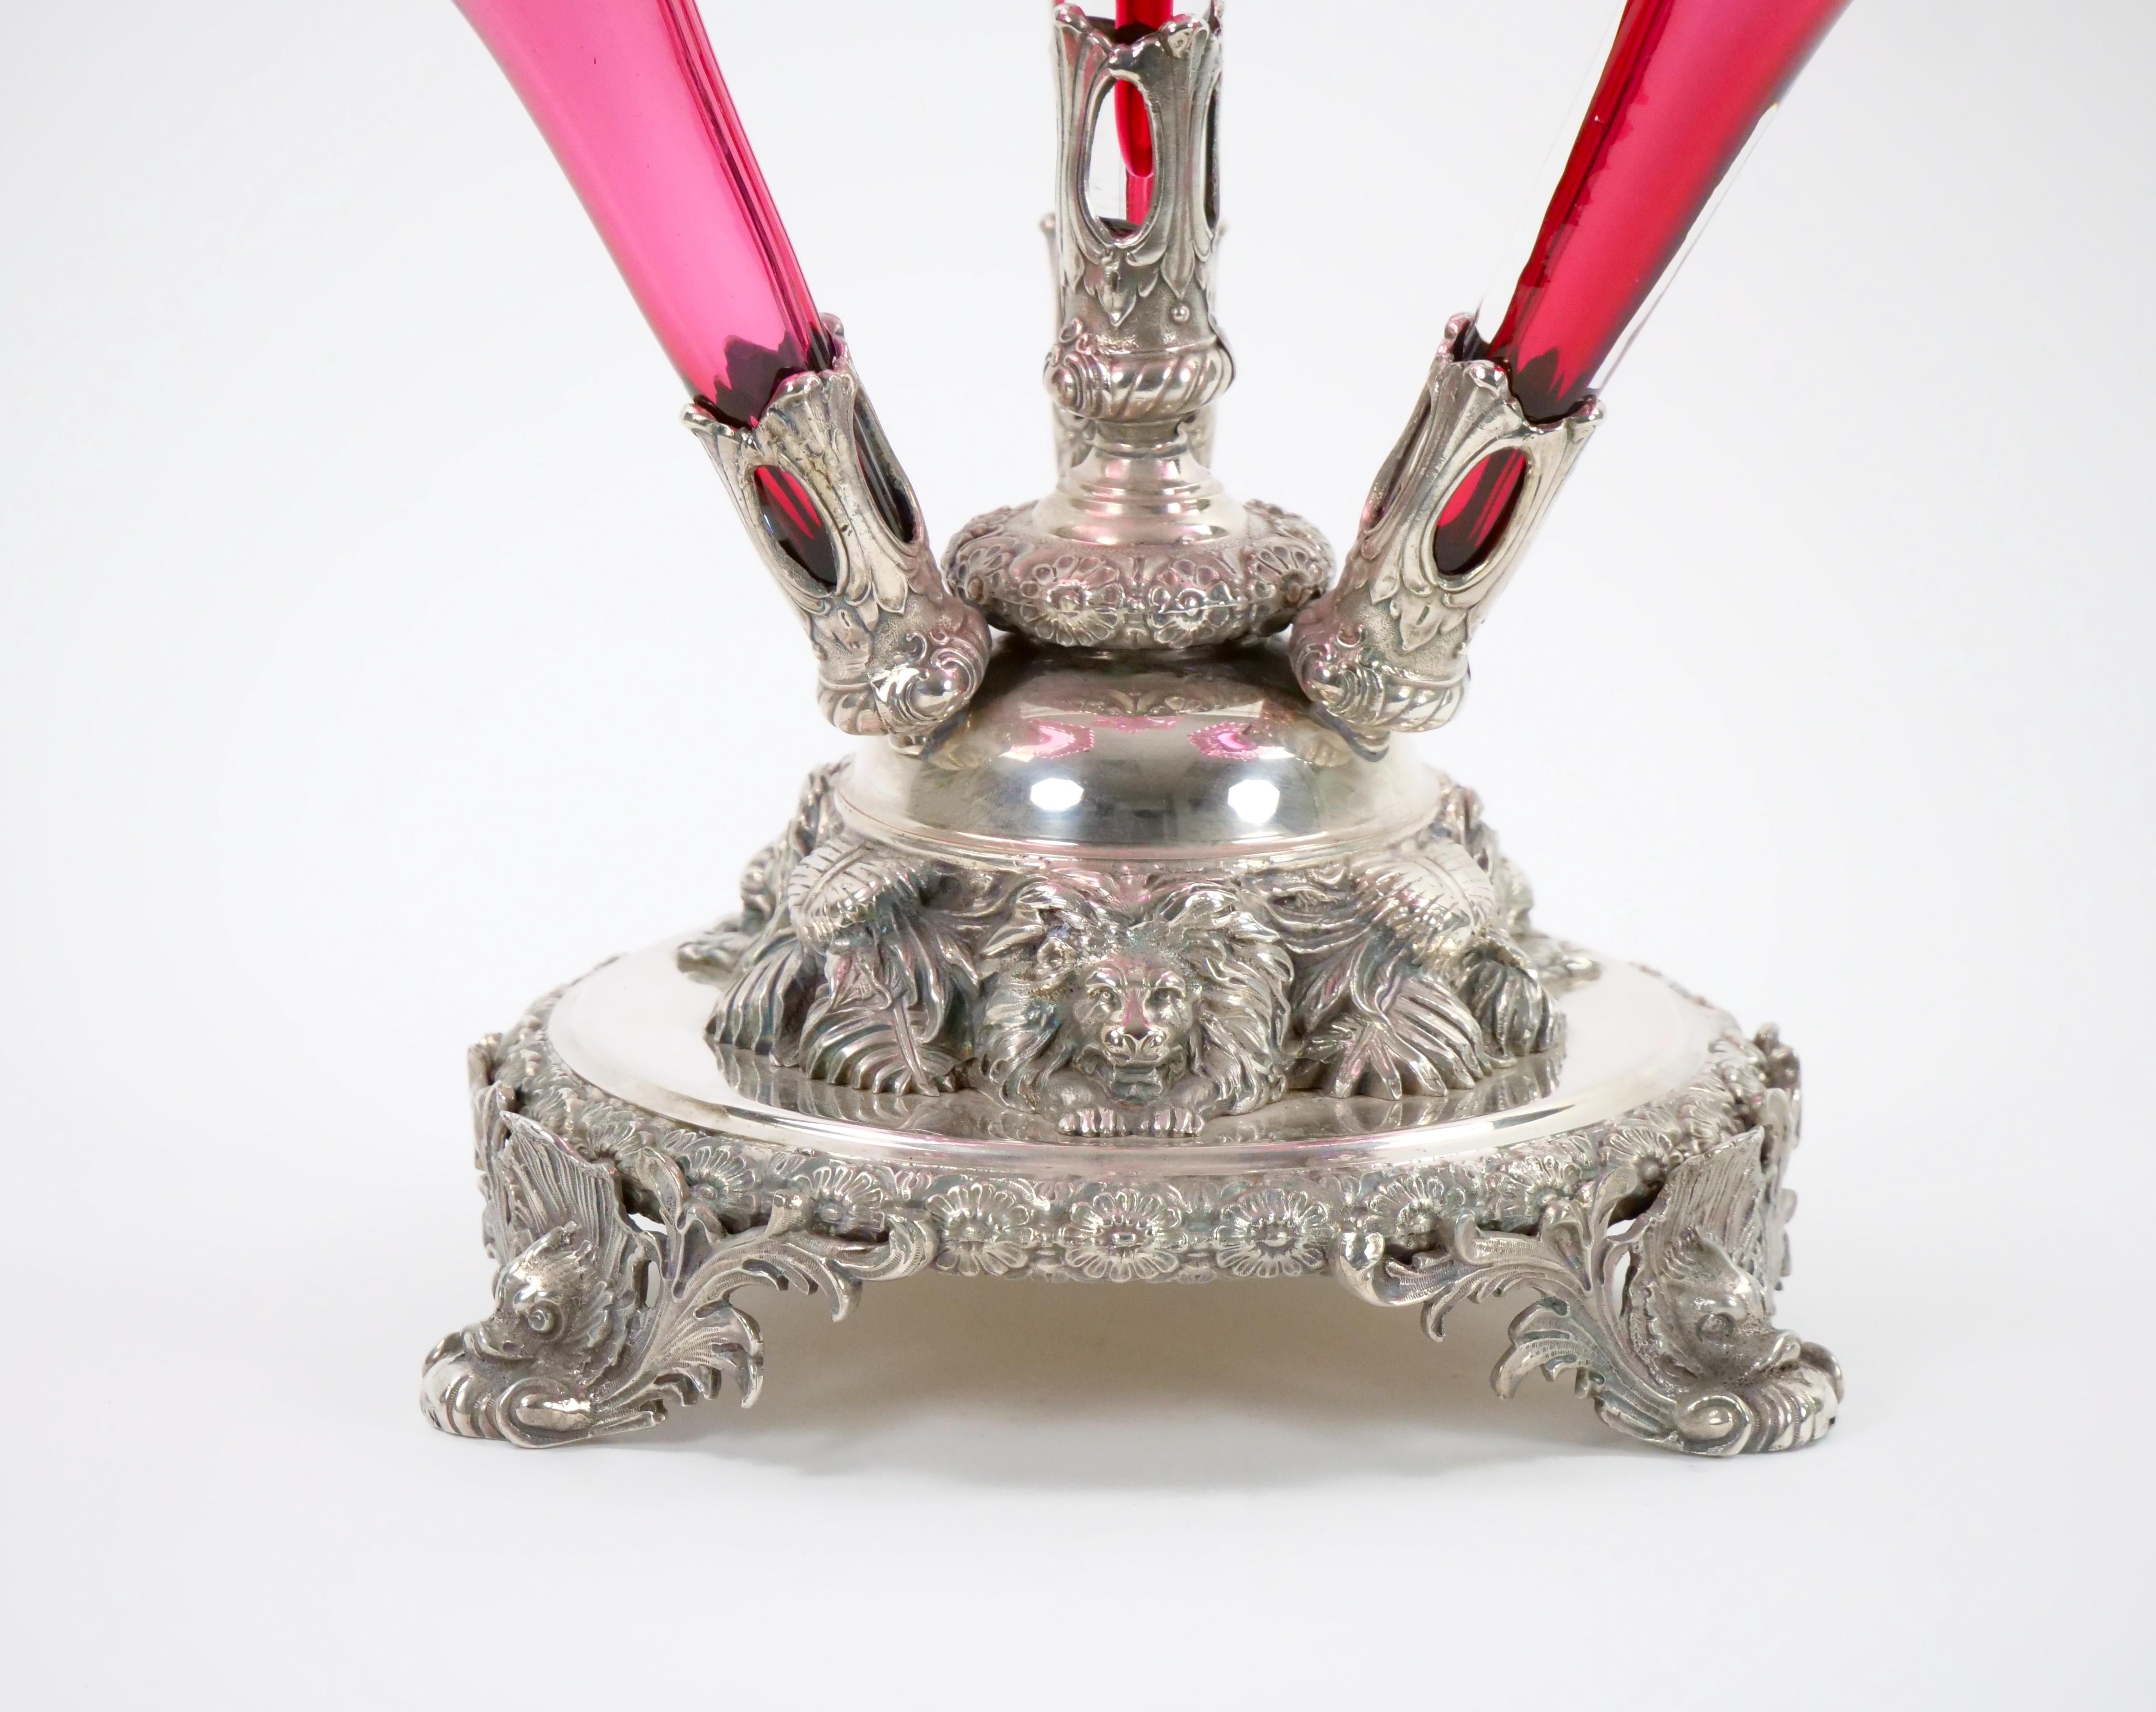 Hand-Crafted 19th Century Georgian Old English Silver Plate and Glass Epergne Centerpiece For Sale